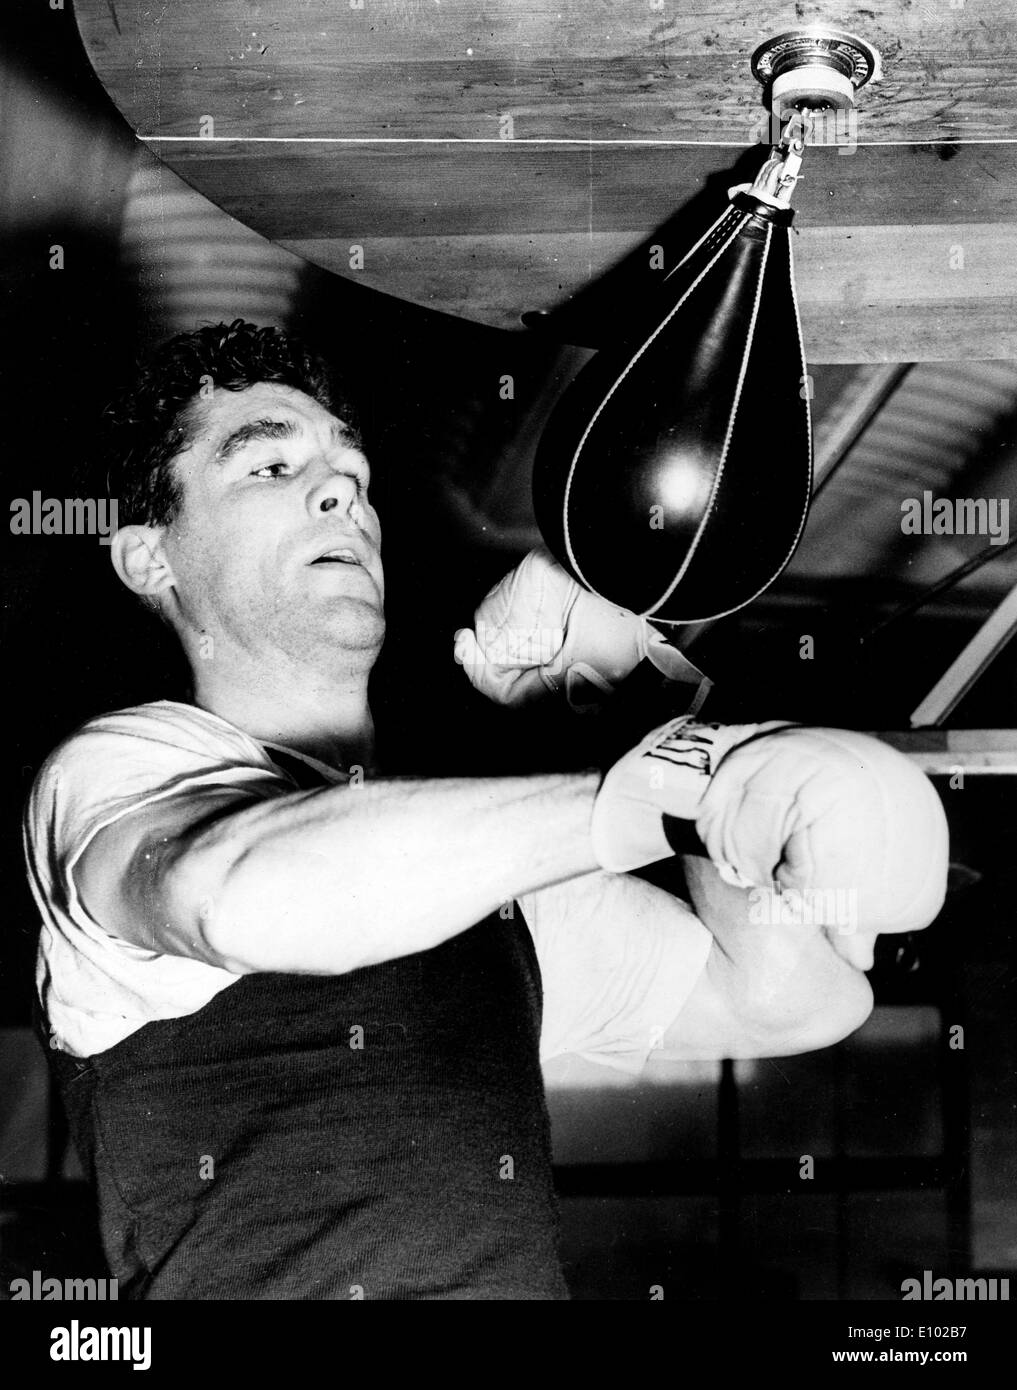 Walter Cartier (1922 - 1995) was a professional boxer turned actor, originally from the Bronx in New York Stock Photo